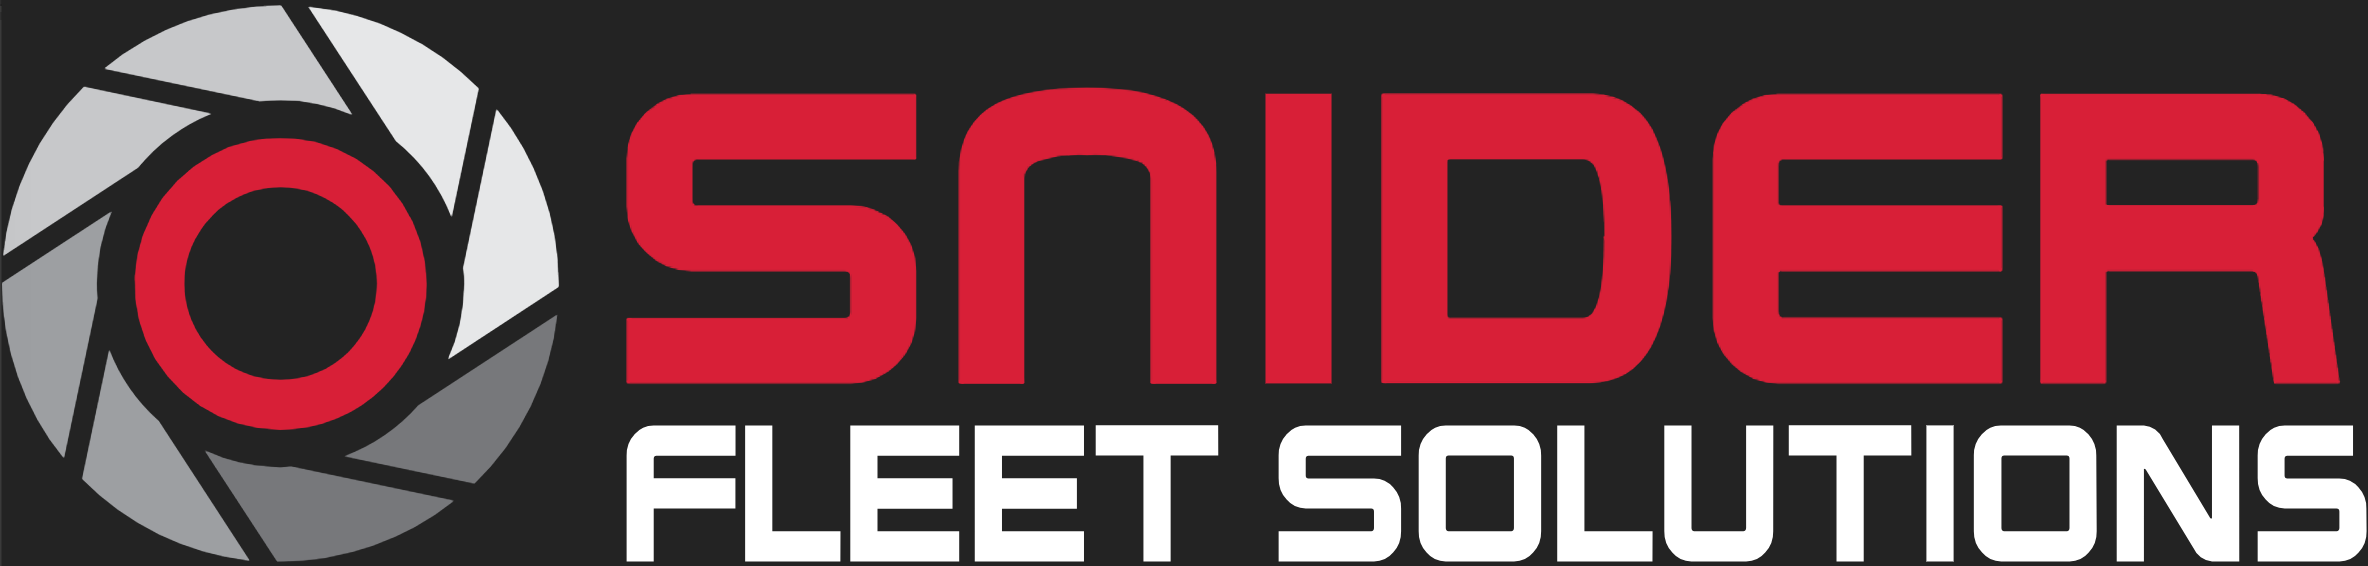 Locations | Commercial Tires + Service | Snider Fleet Solutions